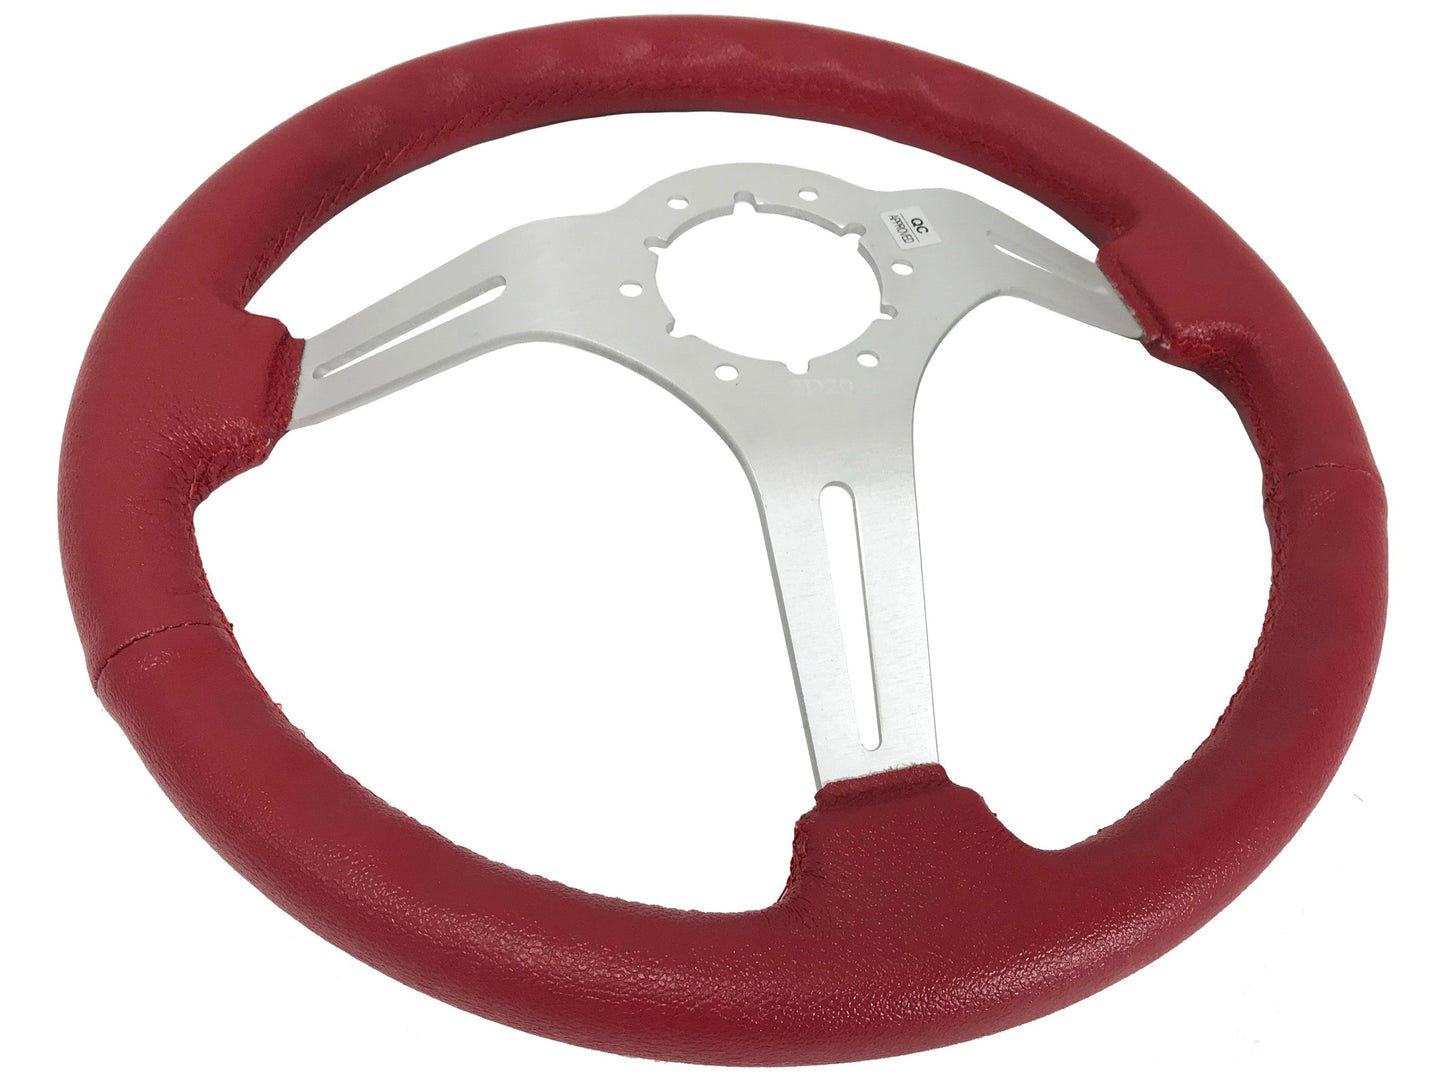 1969-89 Cadillac Telescopic Steering Wheel Kit | Red Leather | ST3014RED